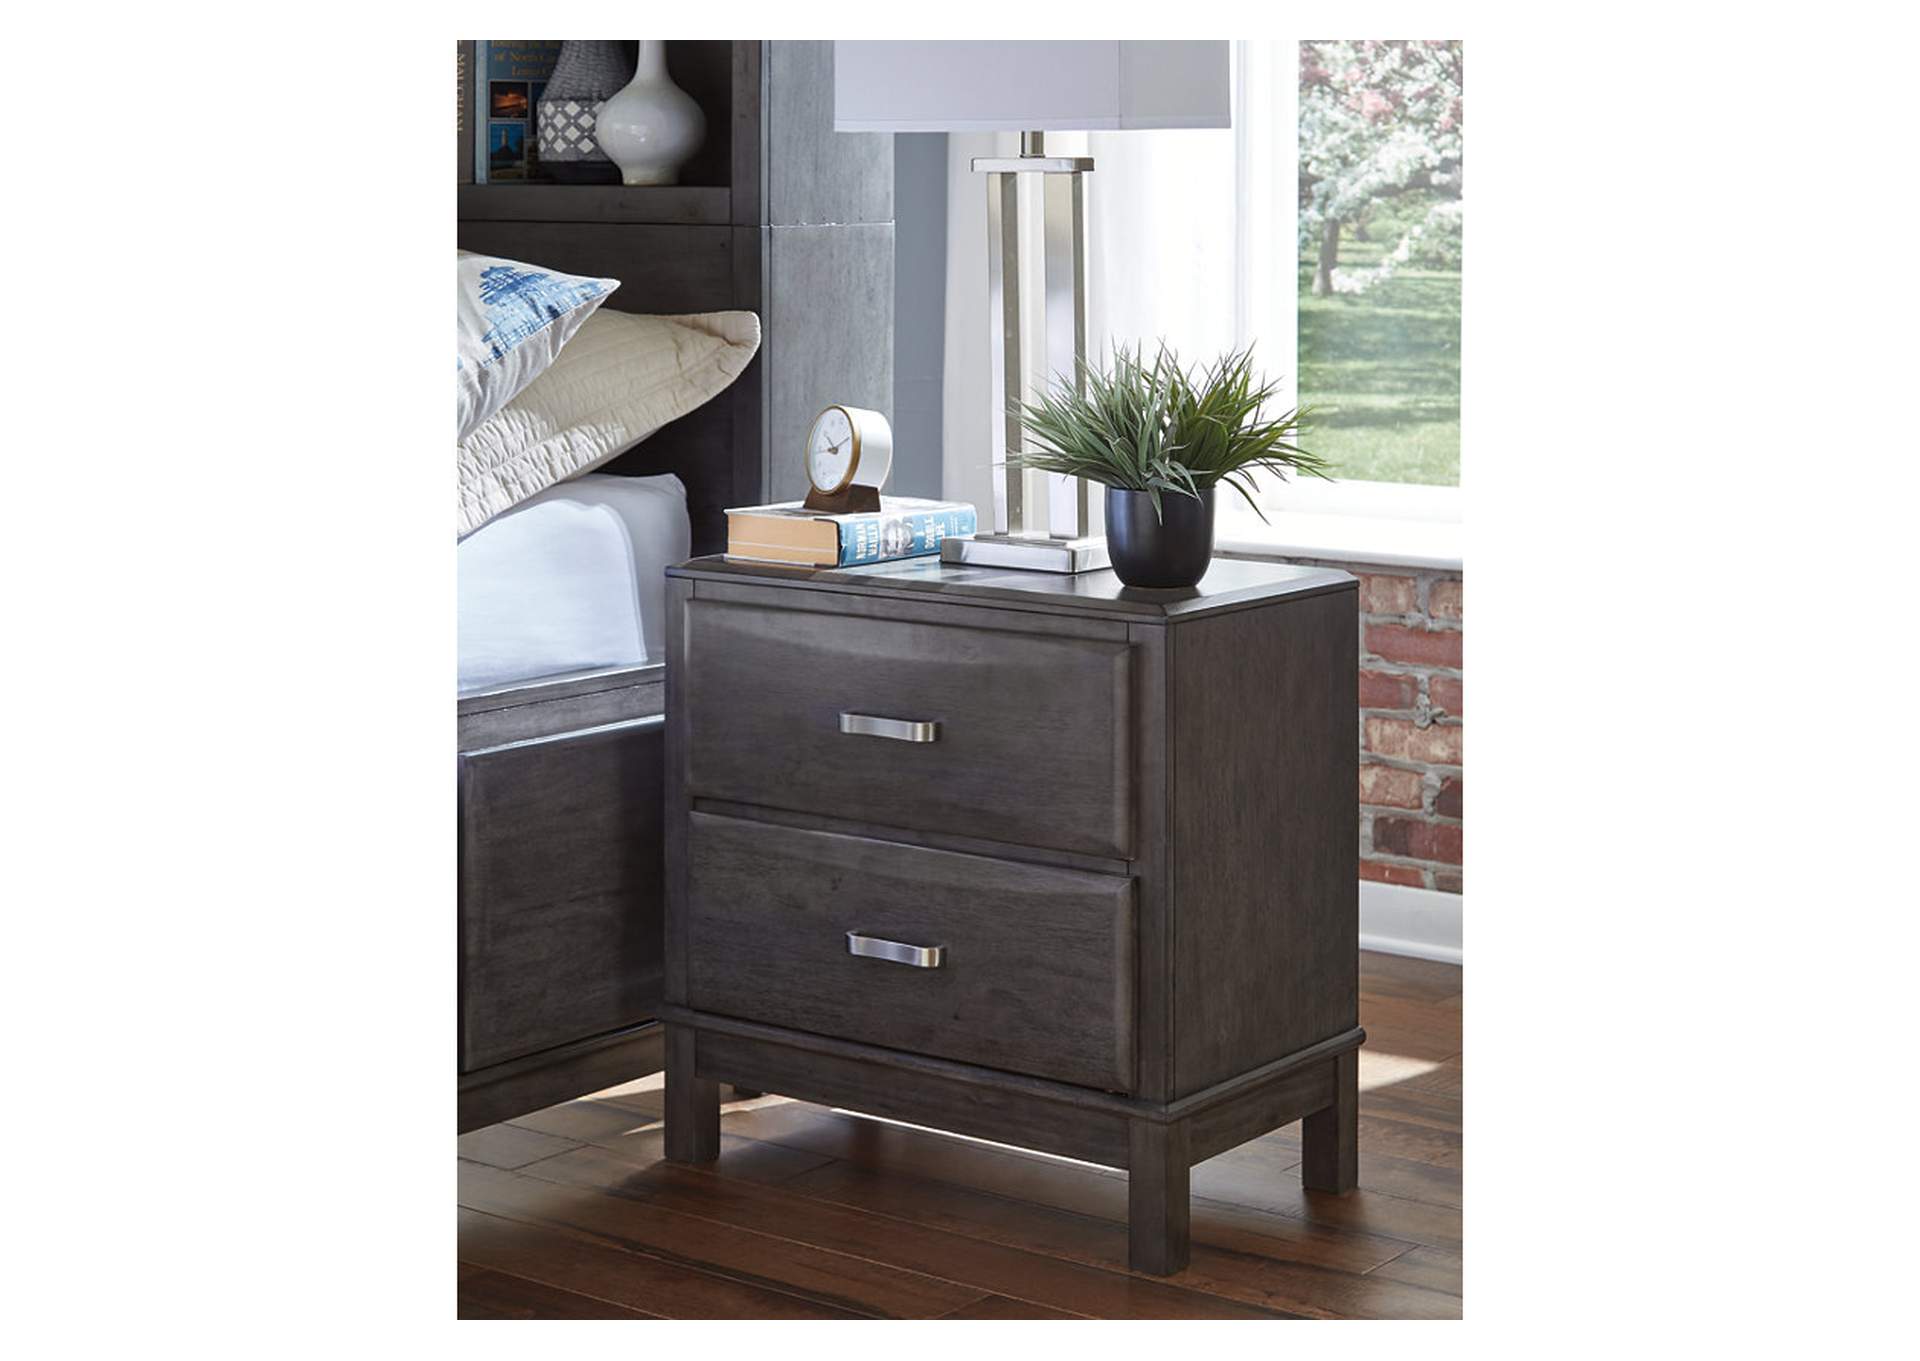 Caitbrook Nightstand,Direct To Consumer Express